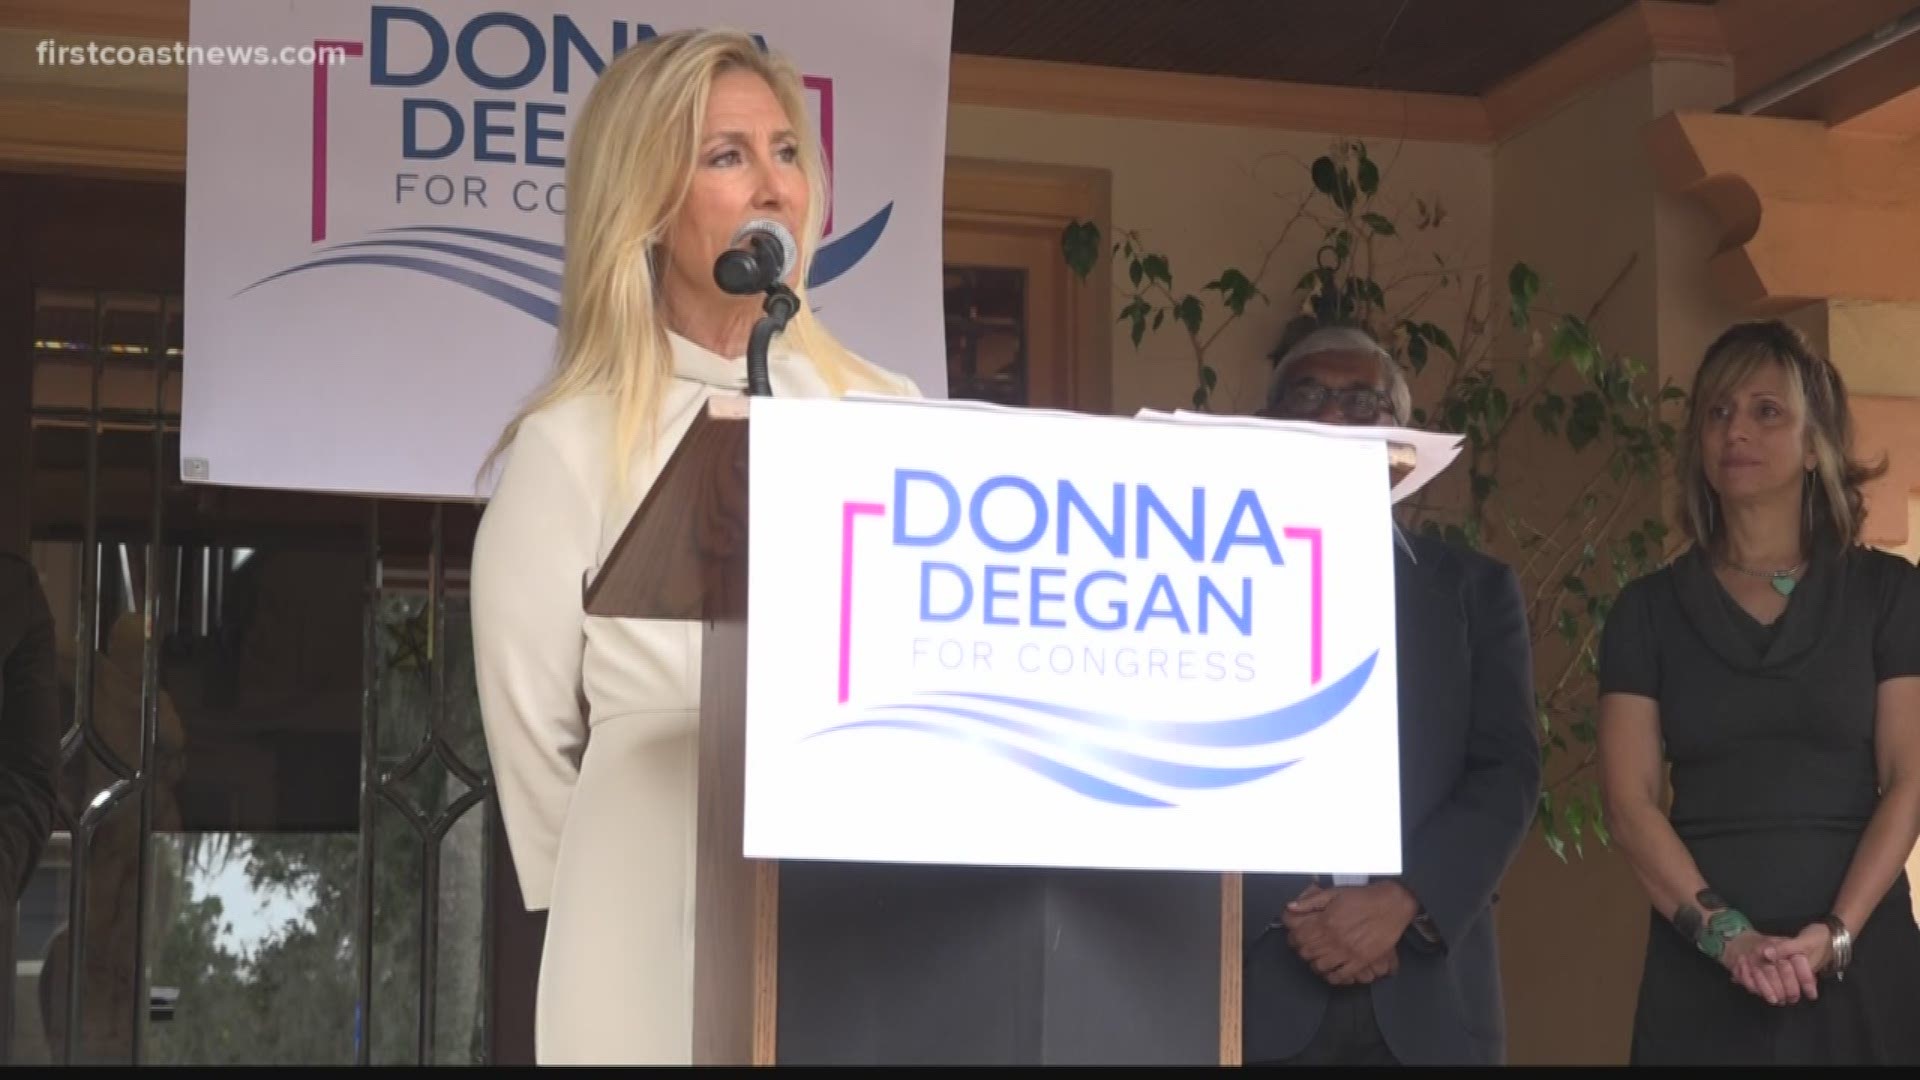 Donna Deegan will be running against GOP U.S. Congressman John Rutherford. She is a former news anchor at FCN and her husband Tim Deegan is our chief meteorologist.